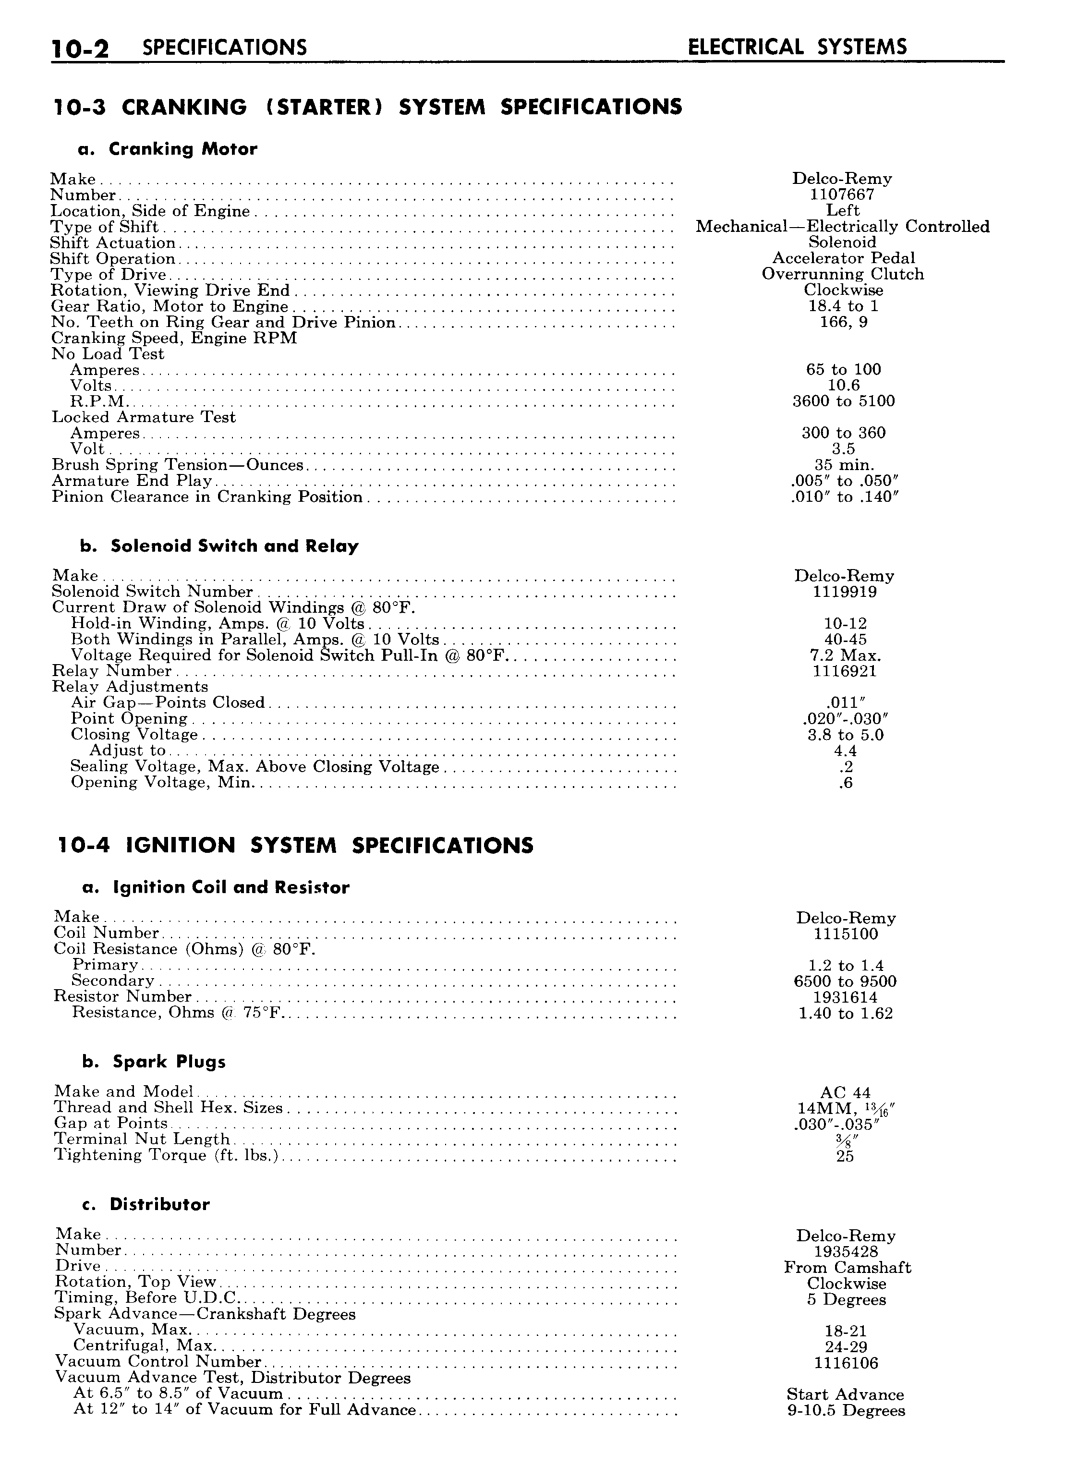 n_11 1957 Buick Shop Manual - Electrical Systems-002-002.jpg